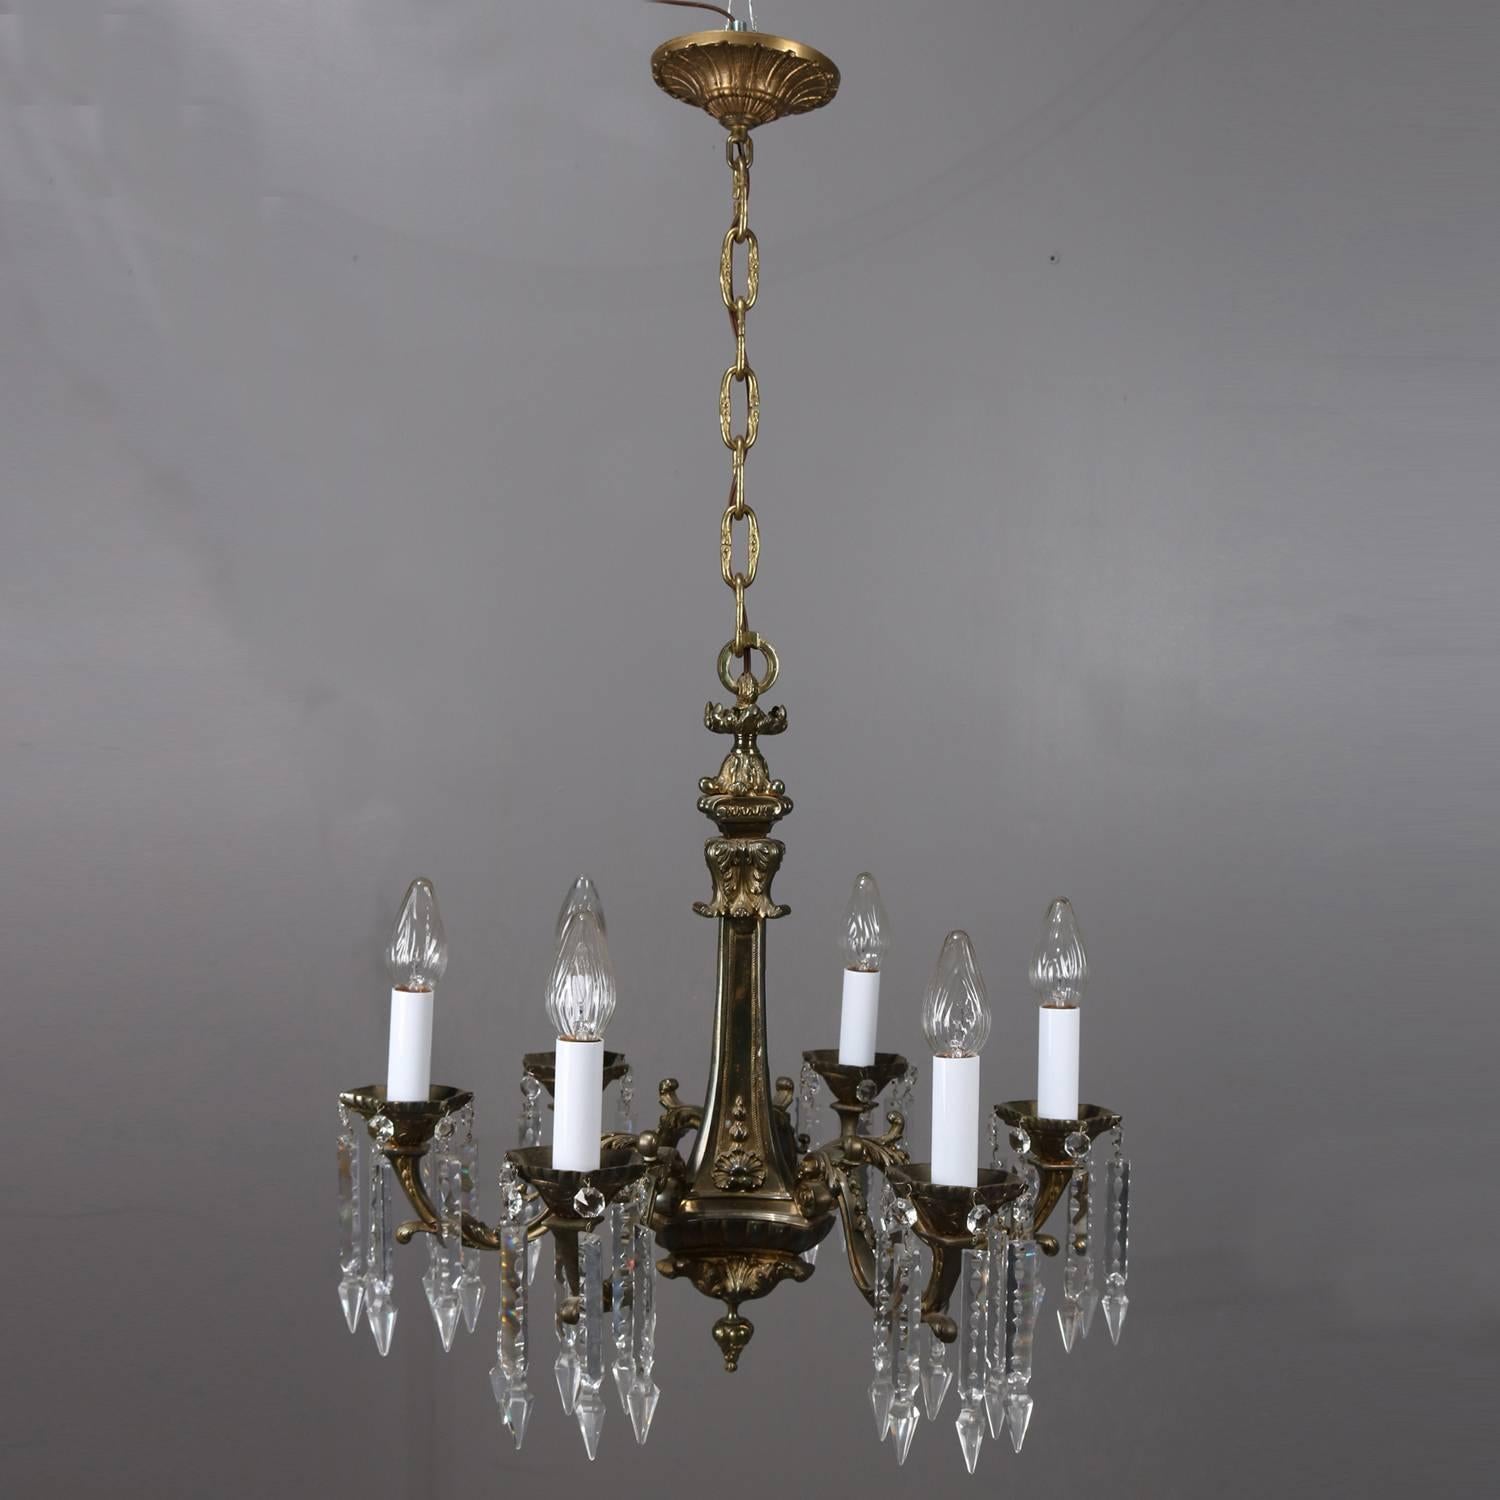 Traditional French Empire chandelier features faceted cast bronze base with floral and foliate decoration, five foliate form arms terminating in candle lights with hanging cut crystal prisms, newly re-wired, circa 1920

Measures: 20